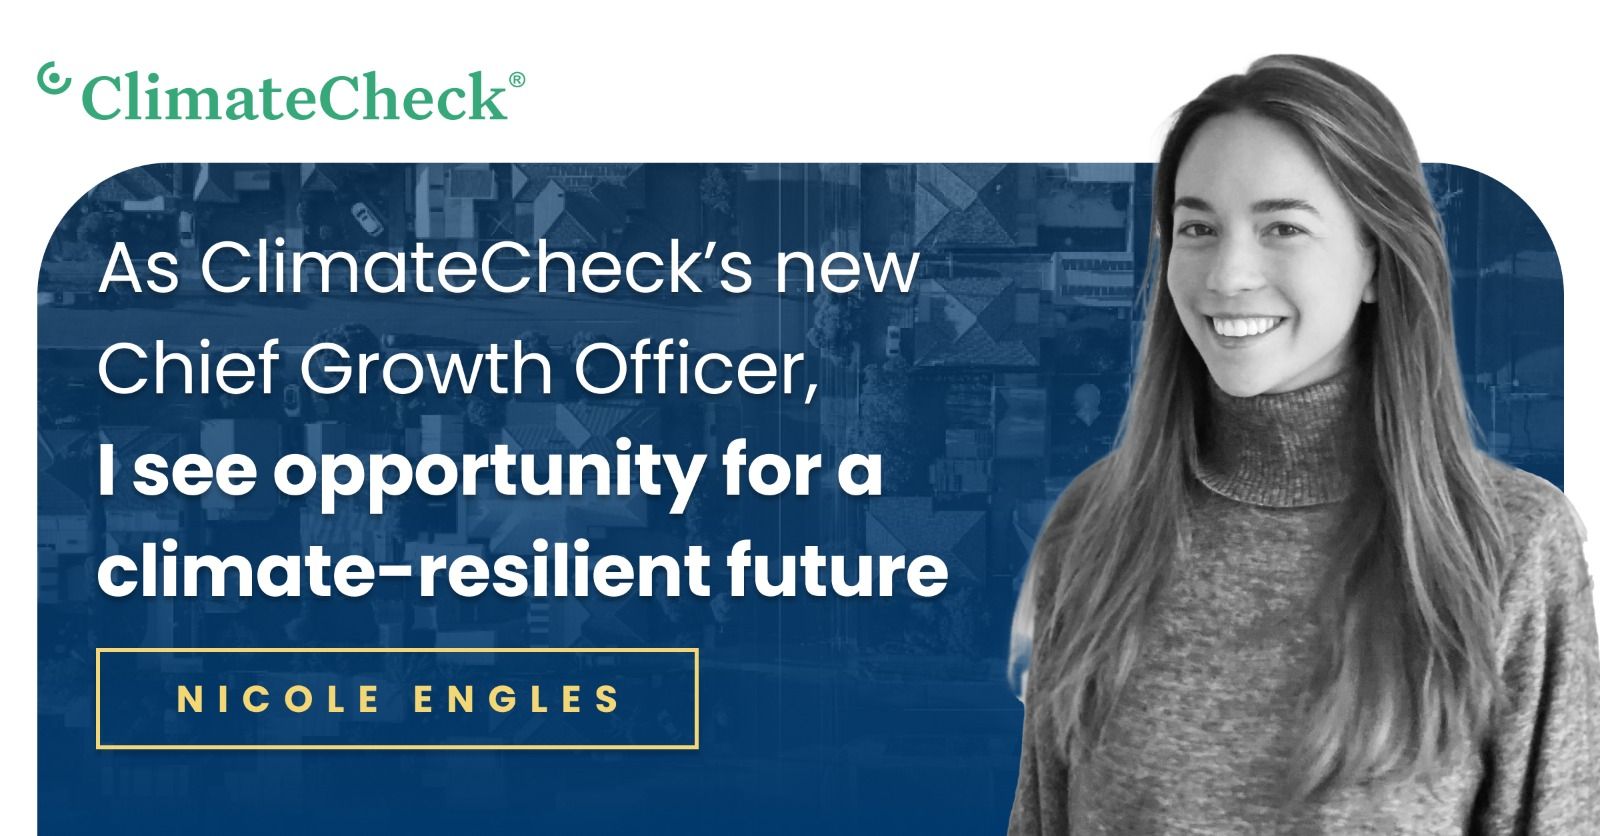 LinkedIn article title: As ClimateCheck's new Chief Growth OFficer, I see opportunity for a climate-resilient future, by Nicole Engels